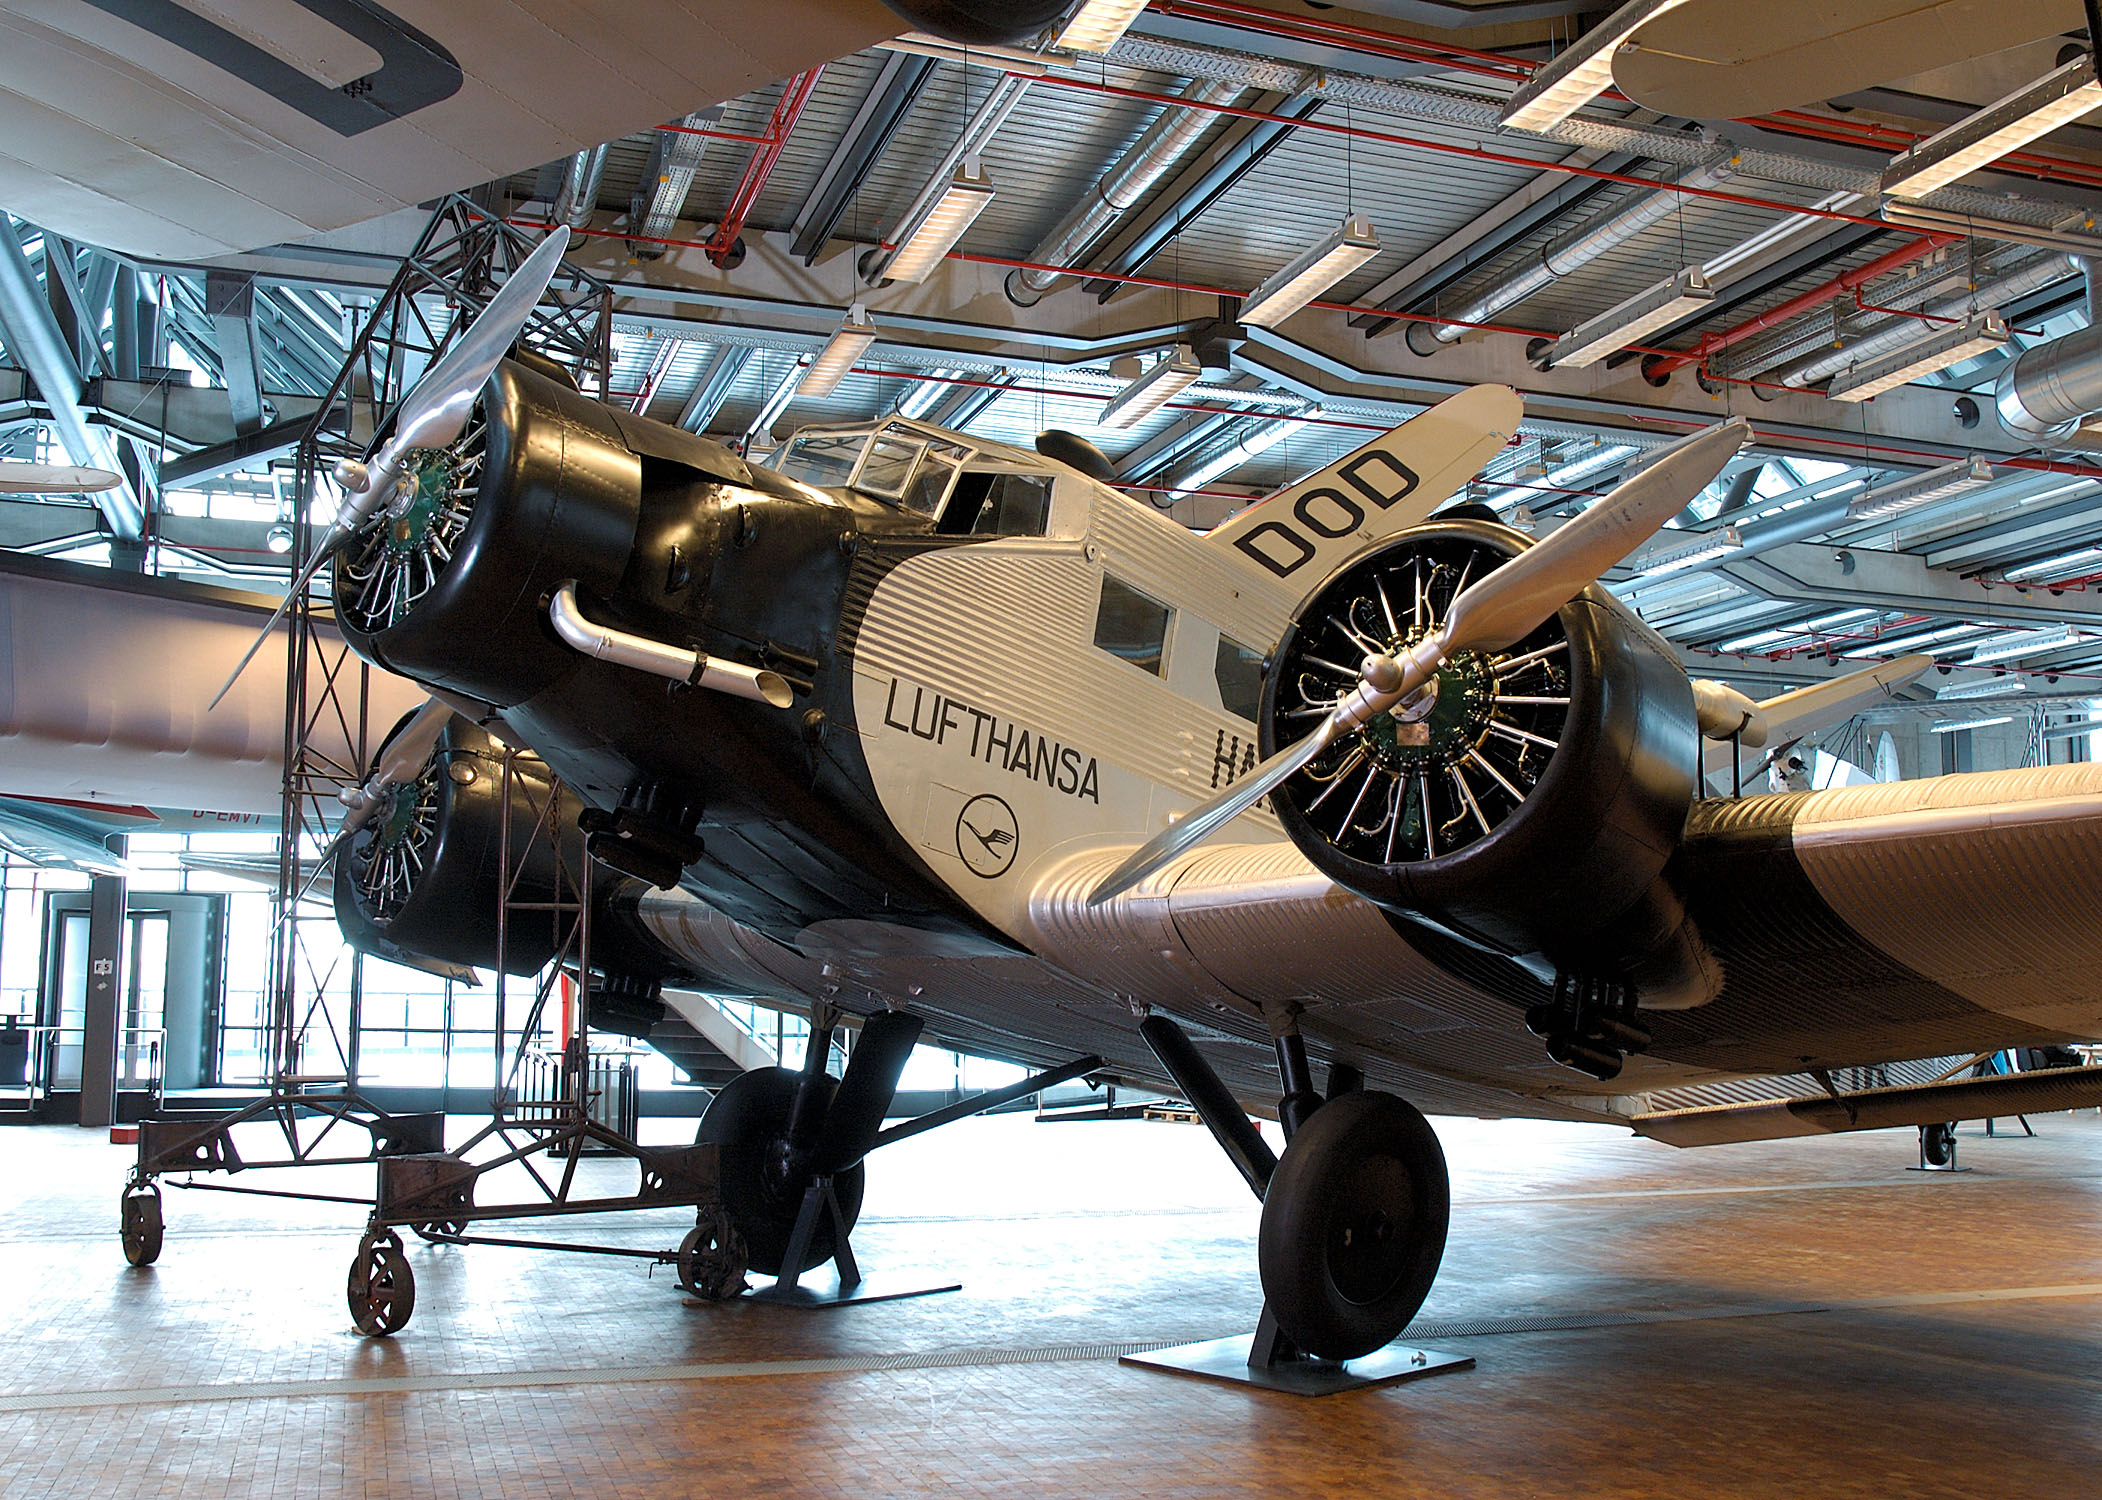 The Junkers 52 